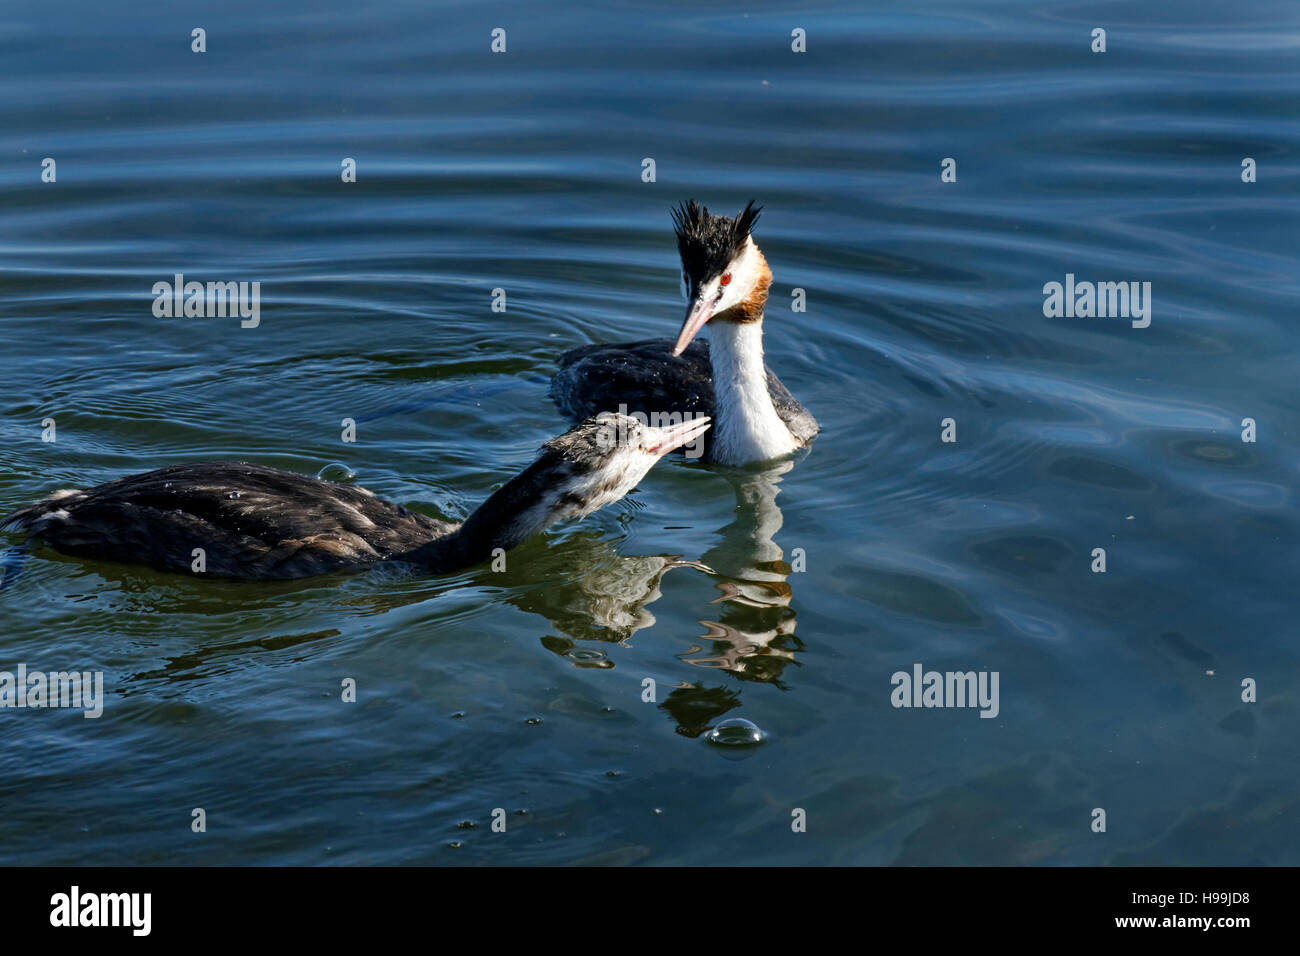 2 Great Crested Grebes (Podiceps cristatus) in water Stock Photo